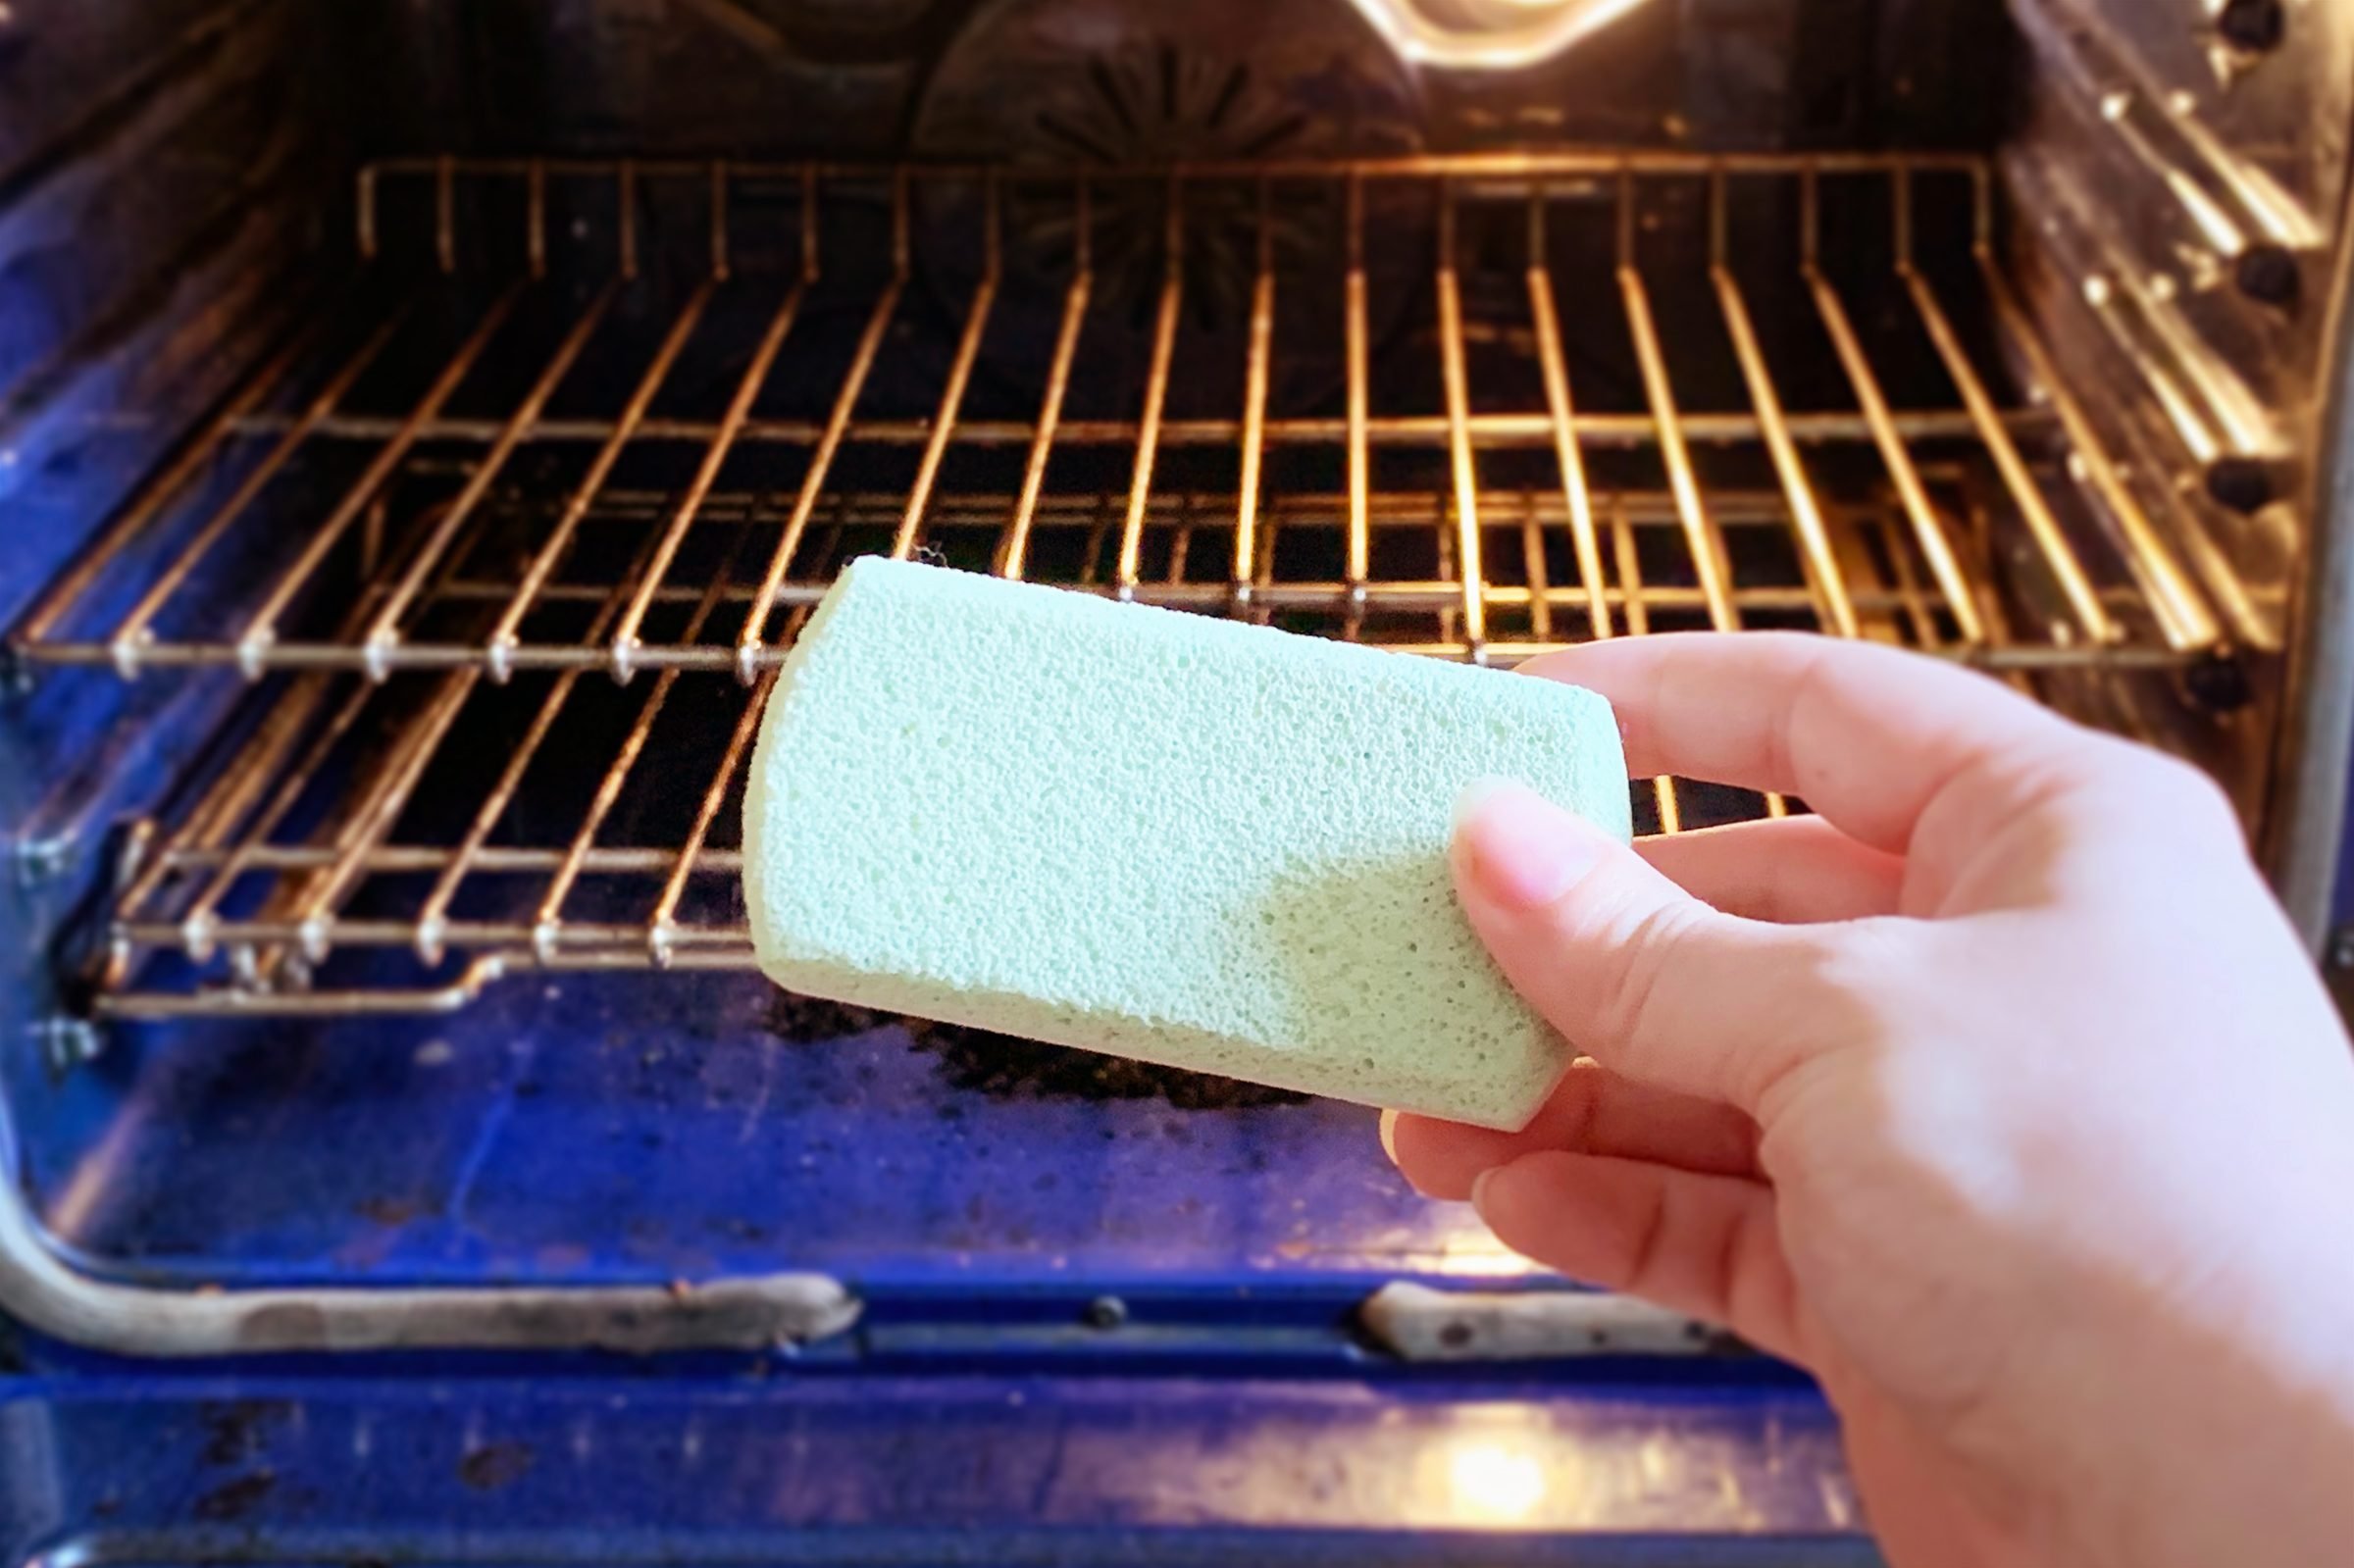 How to use a pumice stone for cleaning - The FryOilSaver Company